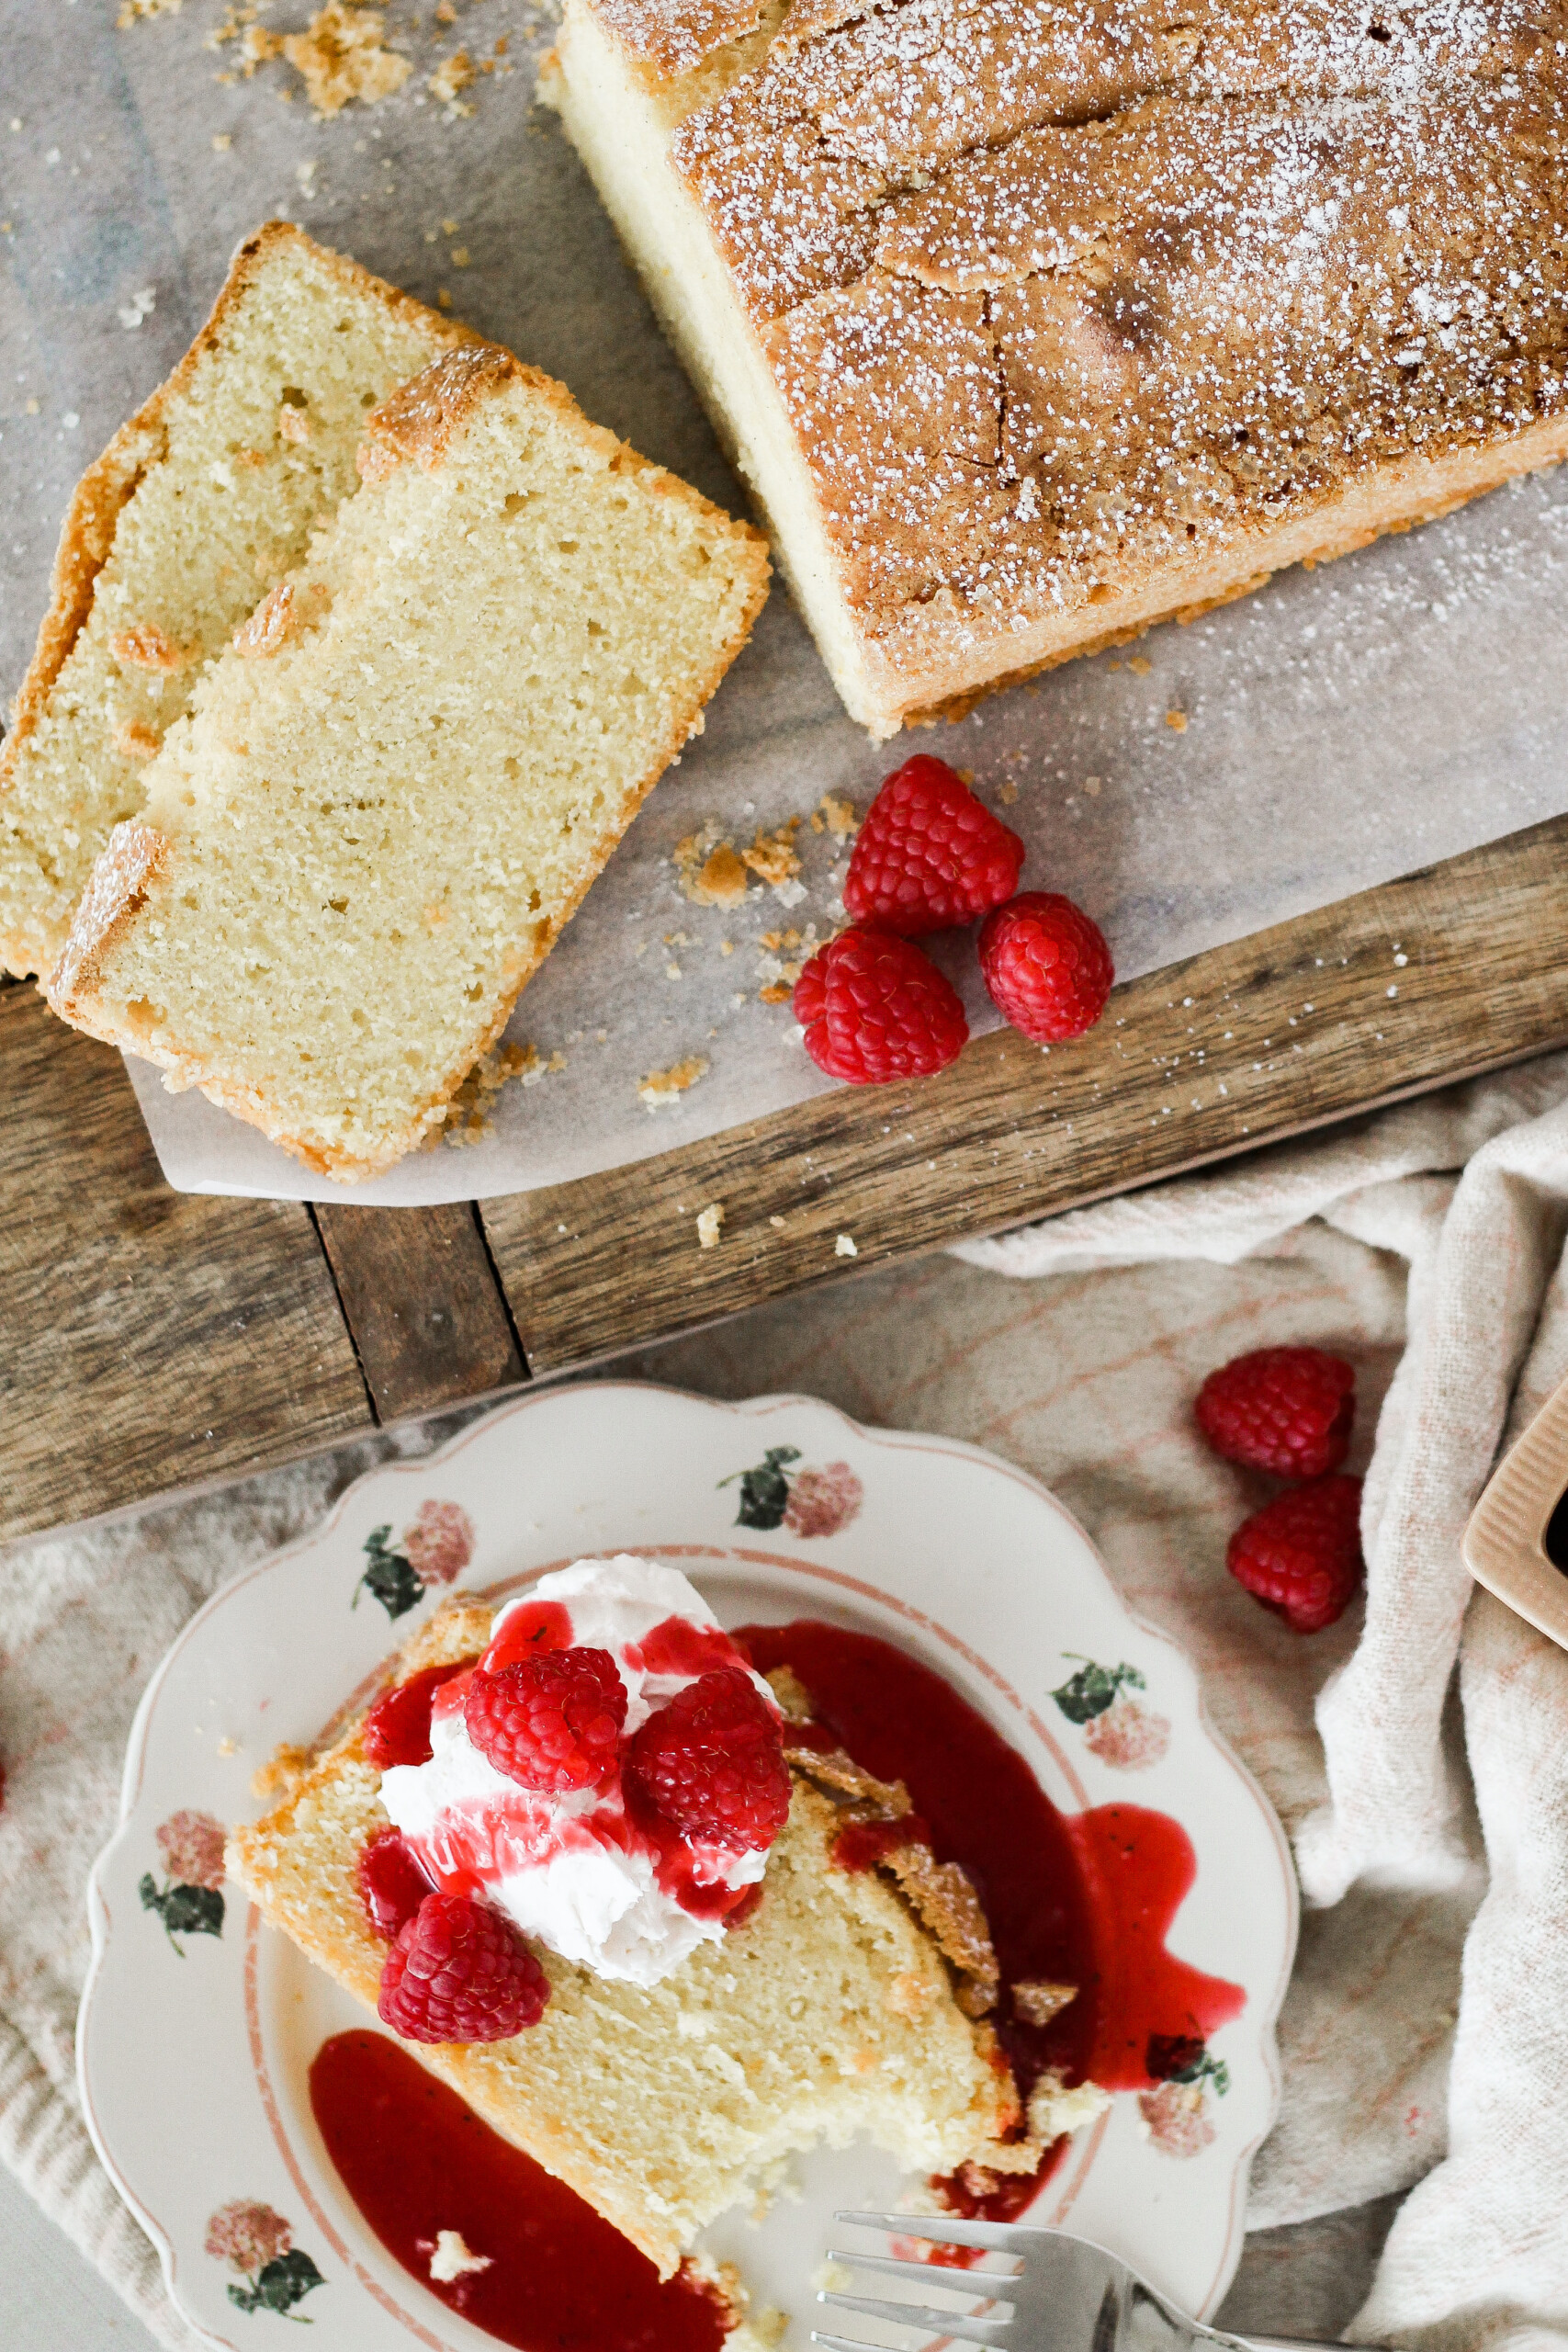 This cake pairs great with a berry compote and whipped cream